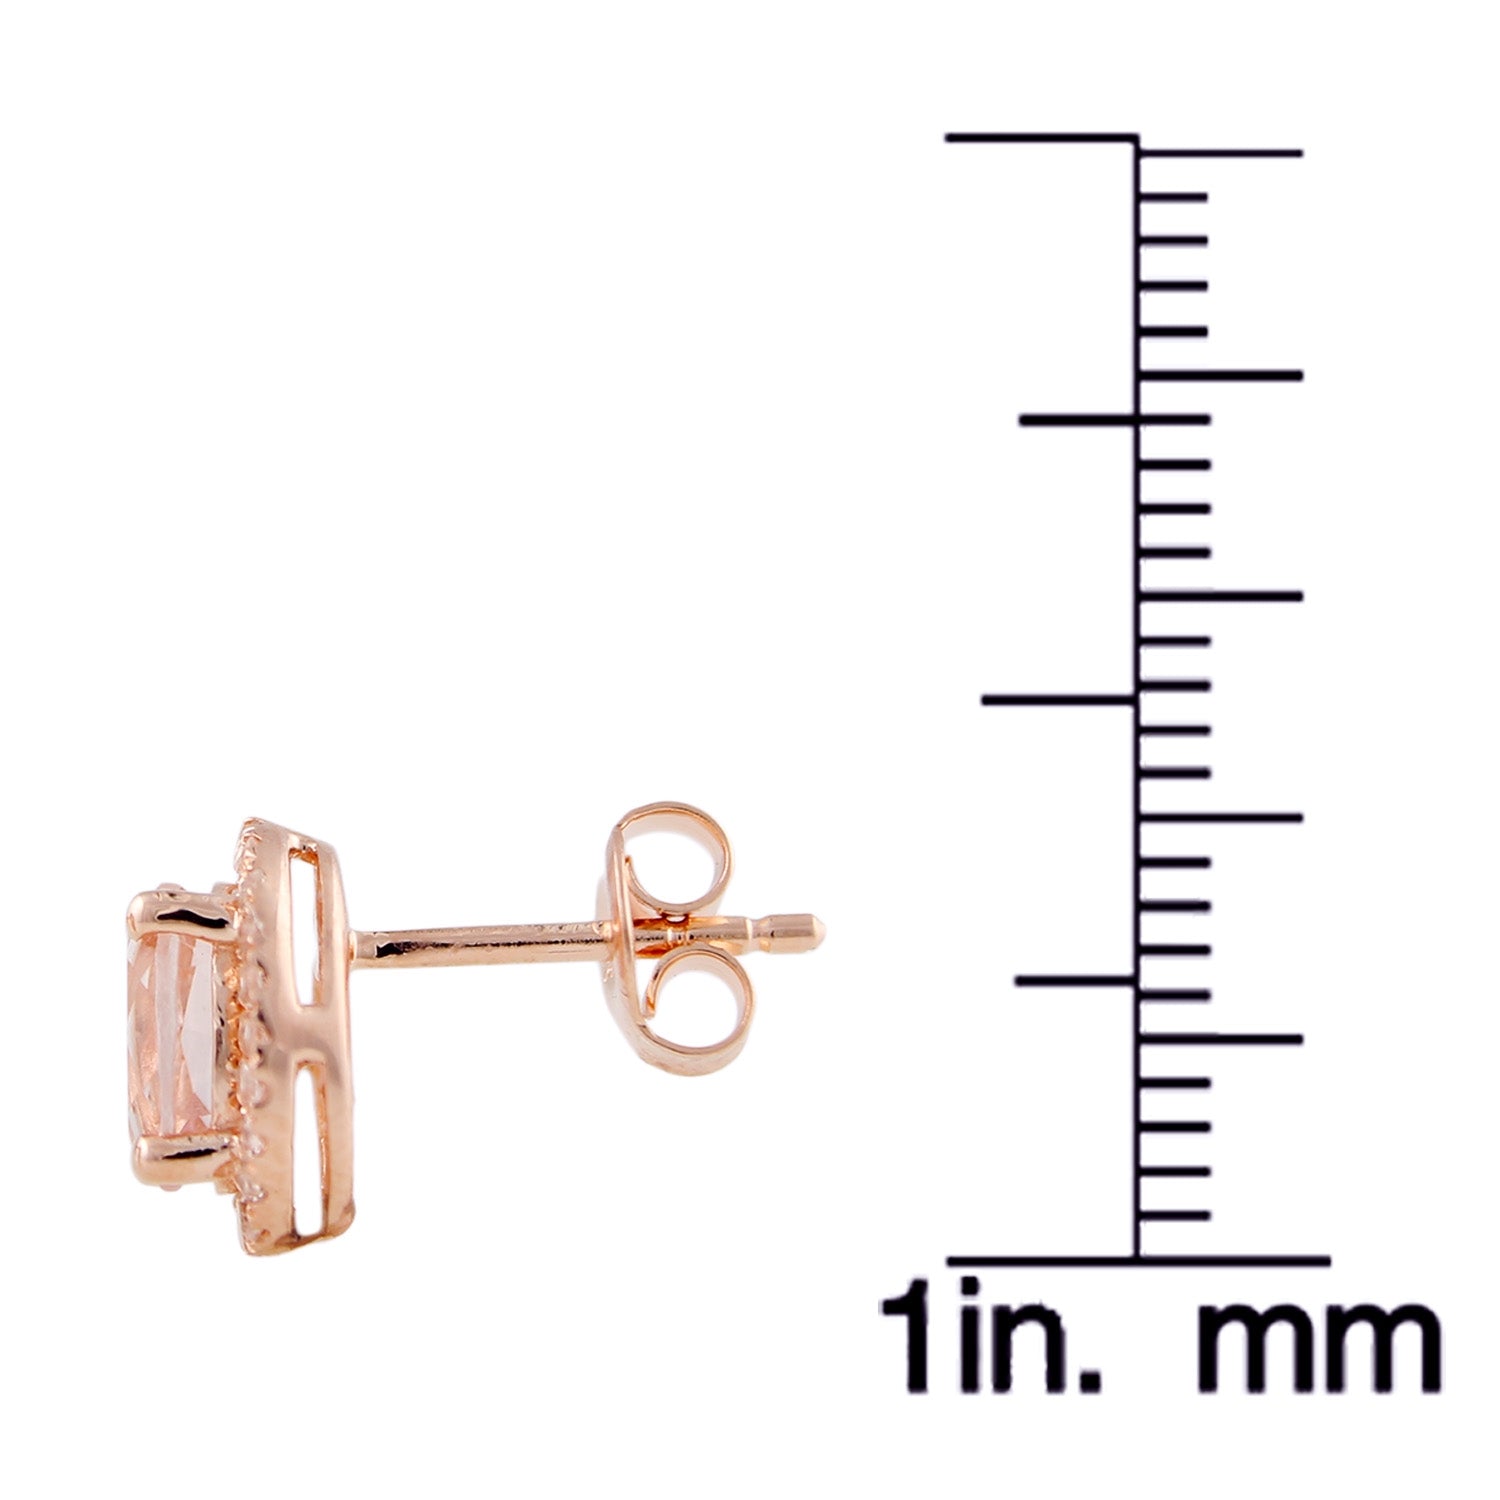 10K Rose Gold Morganite and Diamond Princess Diana Oval Halo Stud Earring (1/5cttw,  H-I Color,  I1-I2 Clarity) - Pinctore